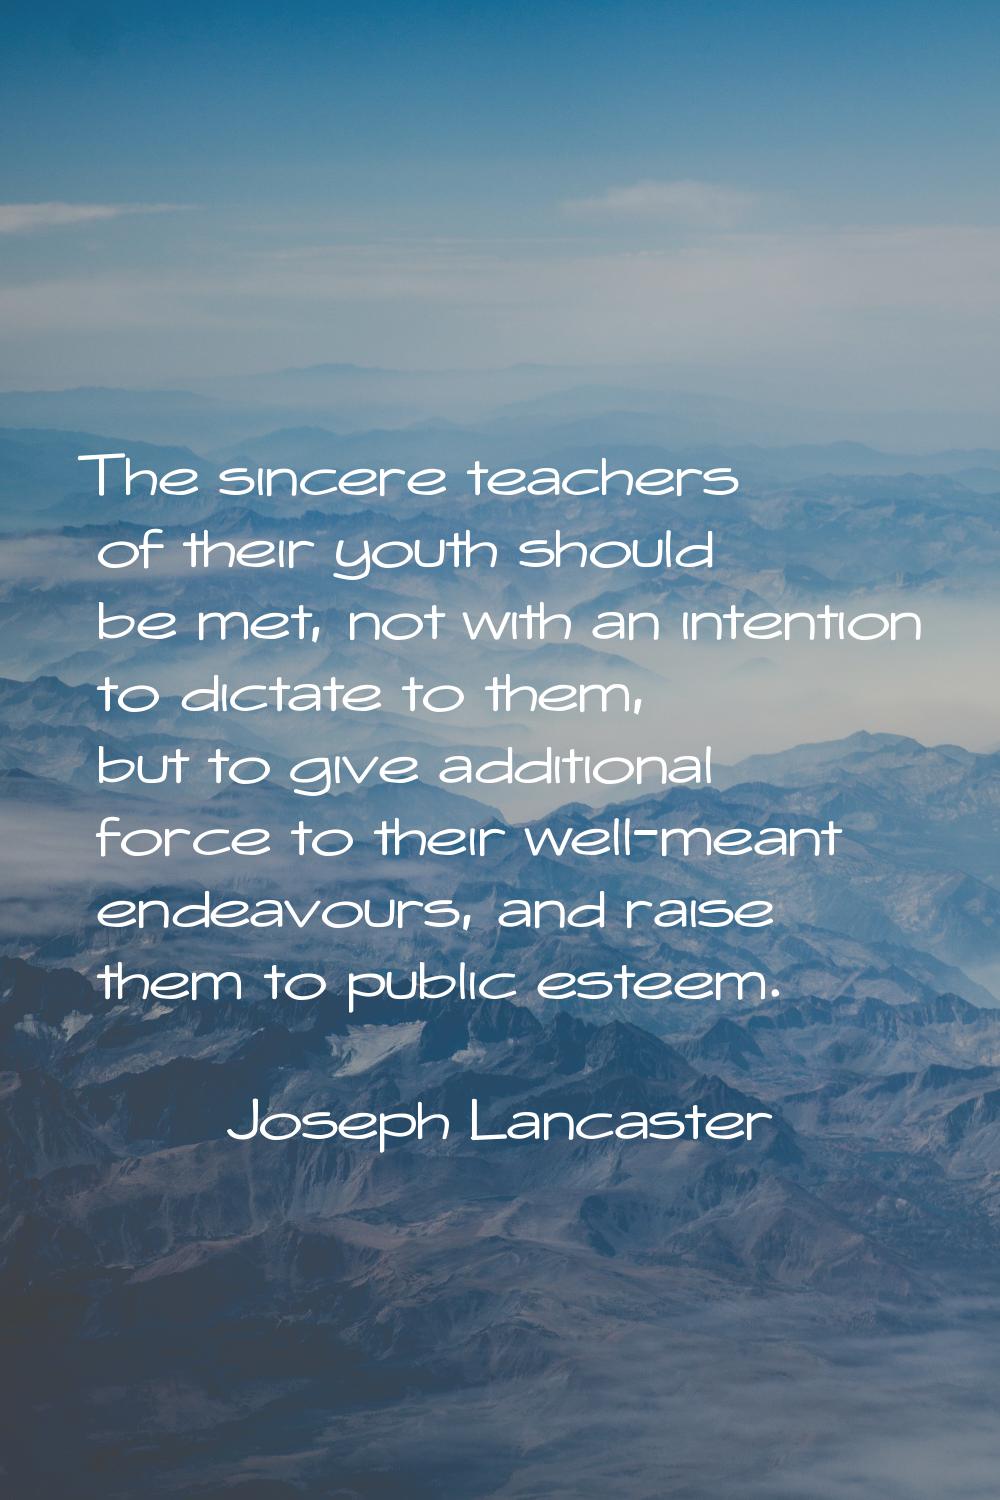 The sincere teachers of their youth should be met, not with an intention to dictate to them, but to